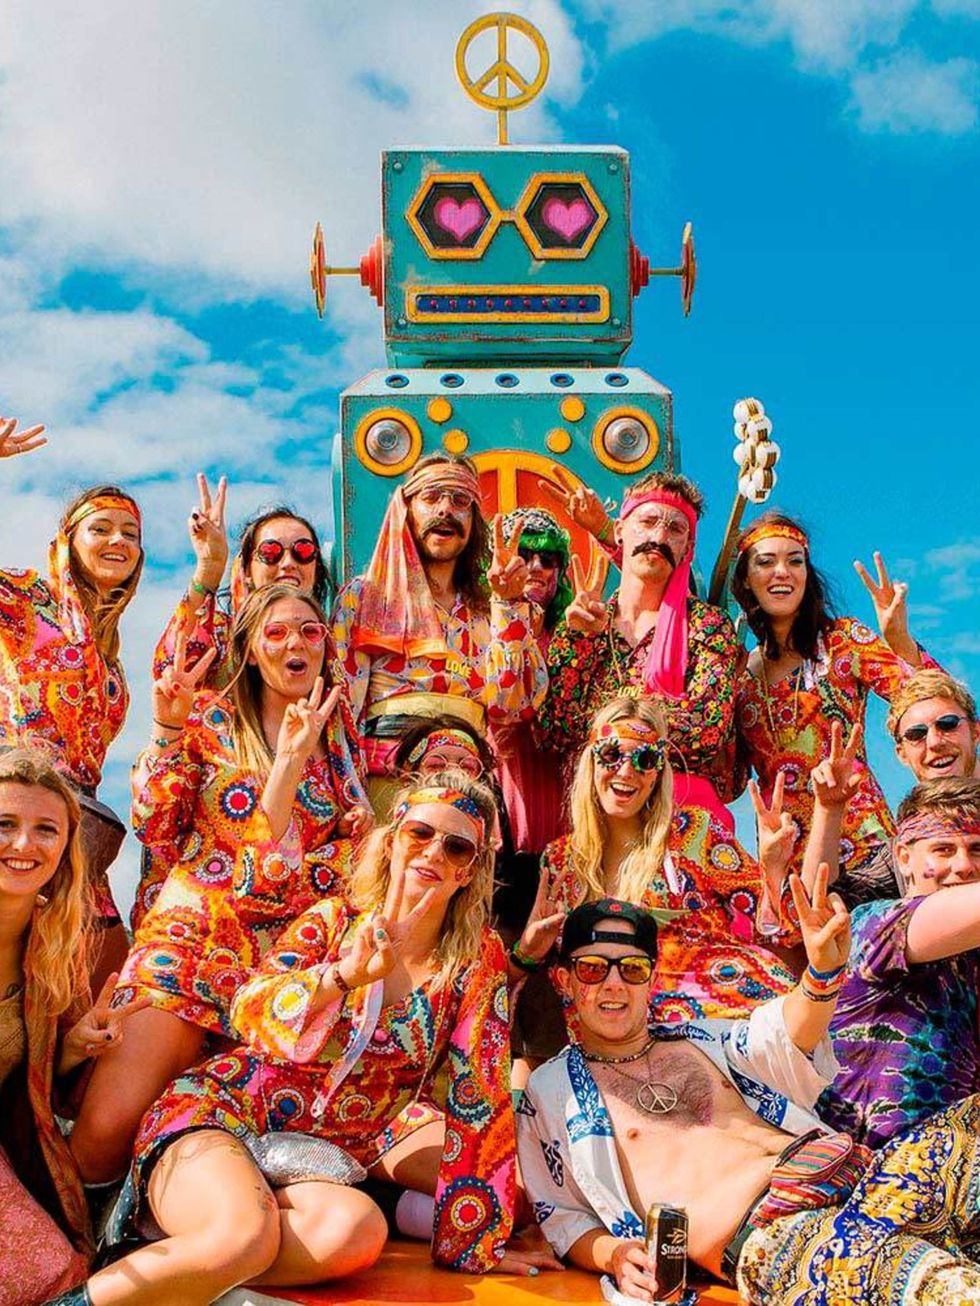 <p>THE LURVE</p>

<p>Give Bestival-goers a theme, and boy do they run with it. This year, the fancy dress was all about the Summer of Love  cue fields full of flares, round specs and ensembles psychedelic enough to make Austin Powers look understated. Ti